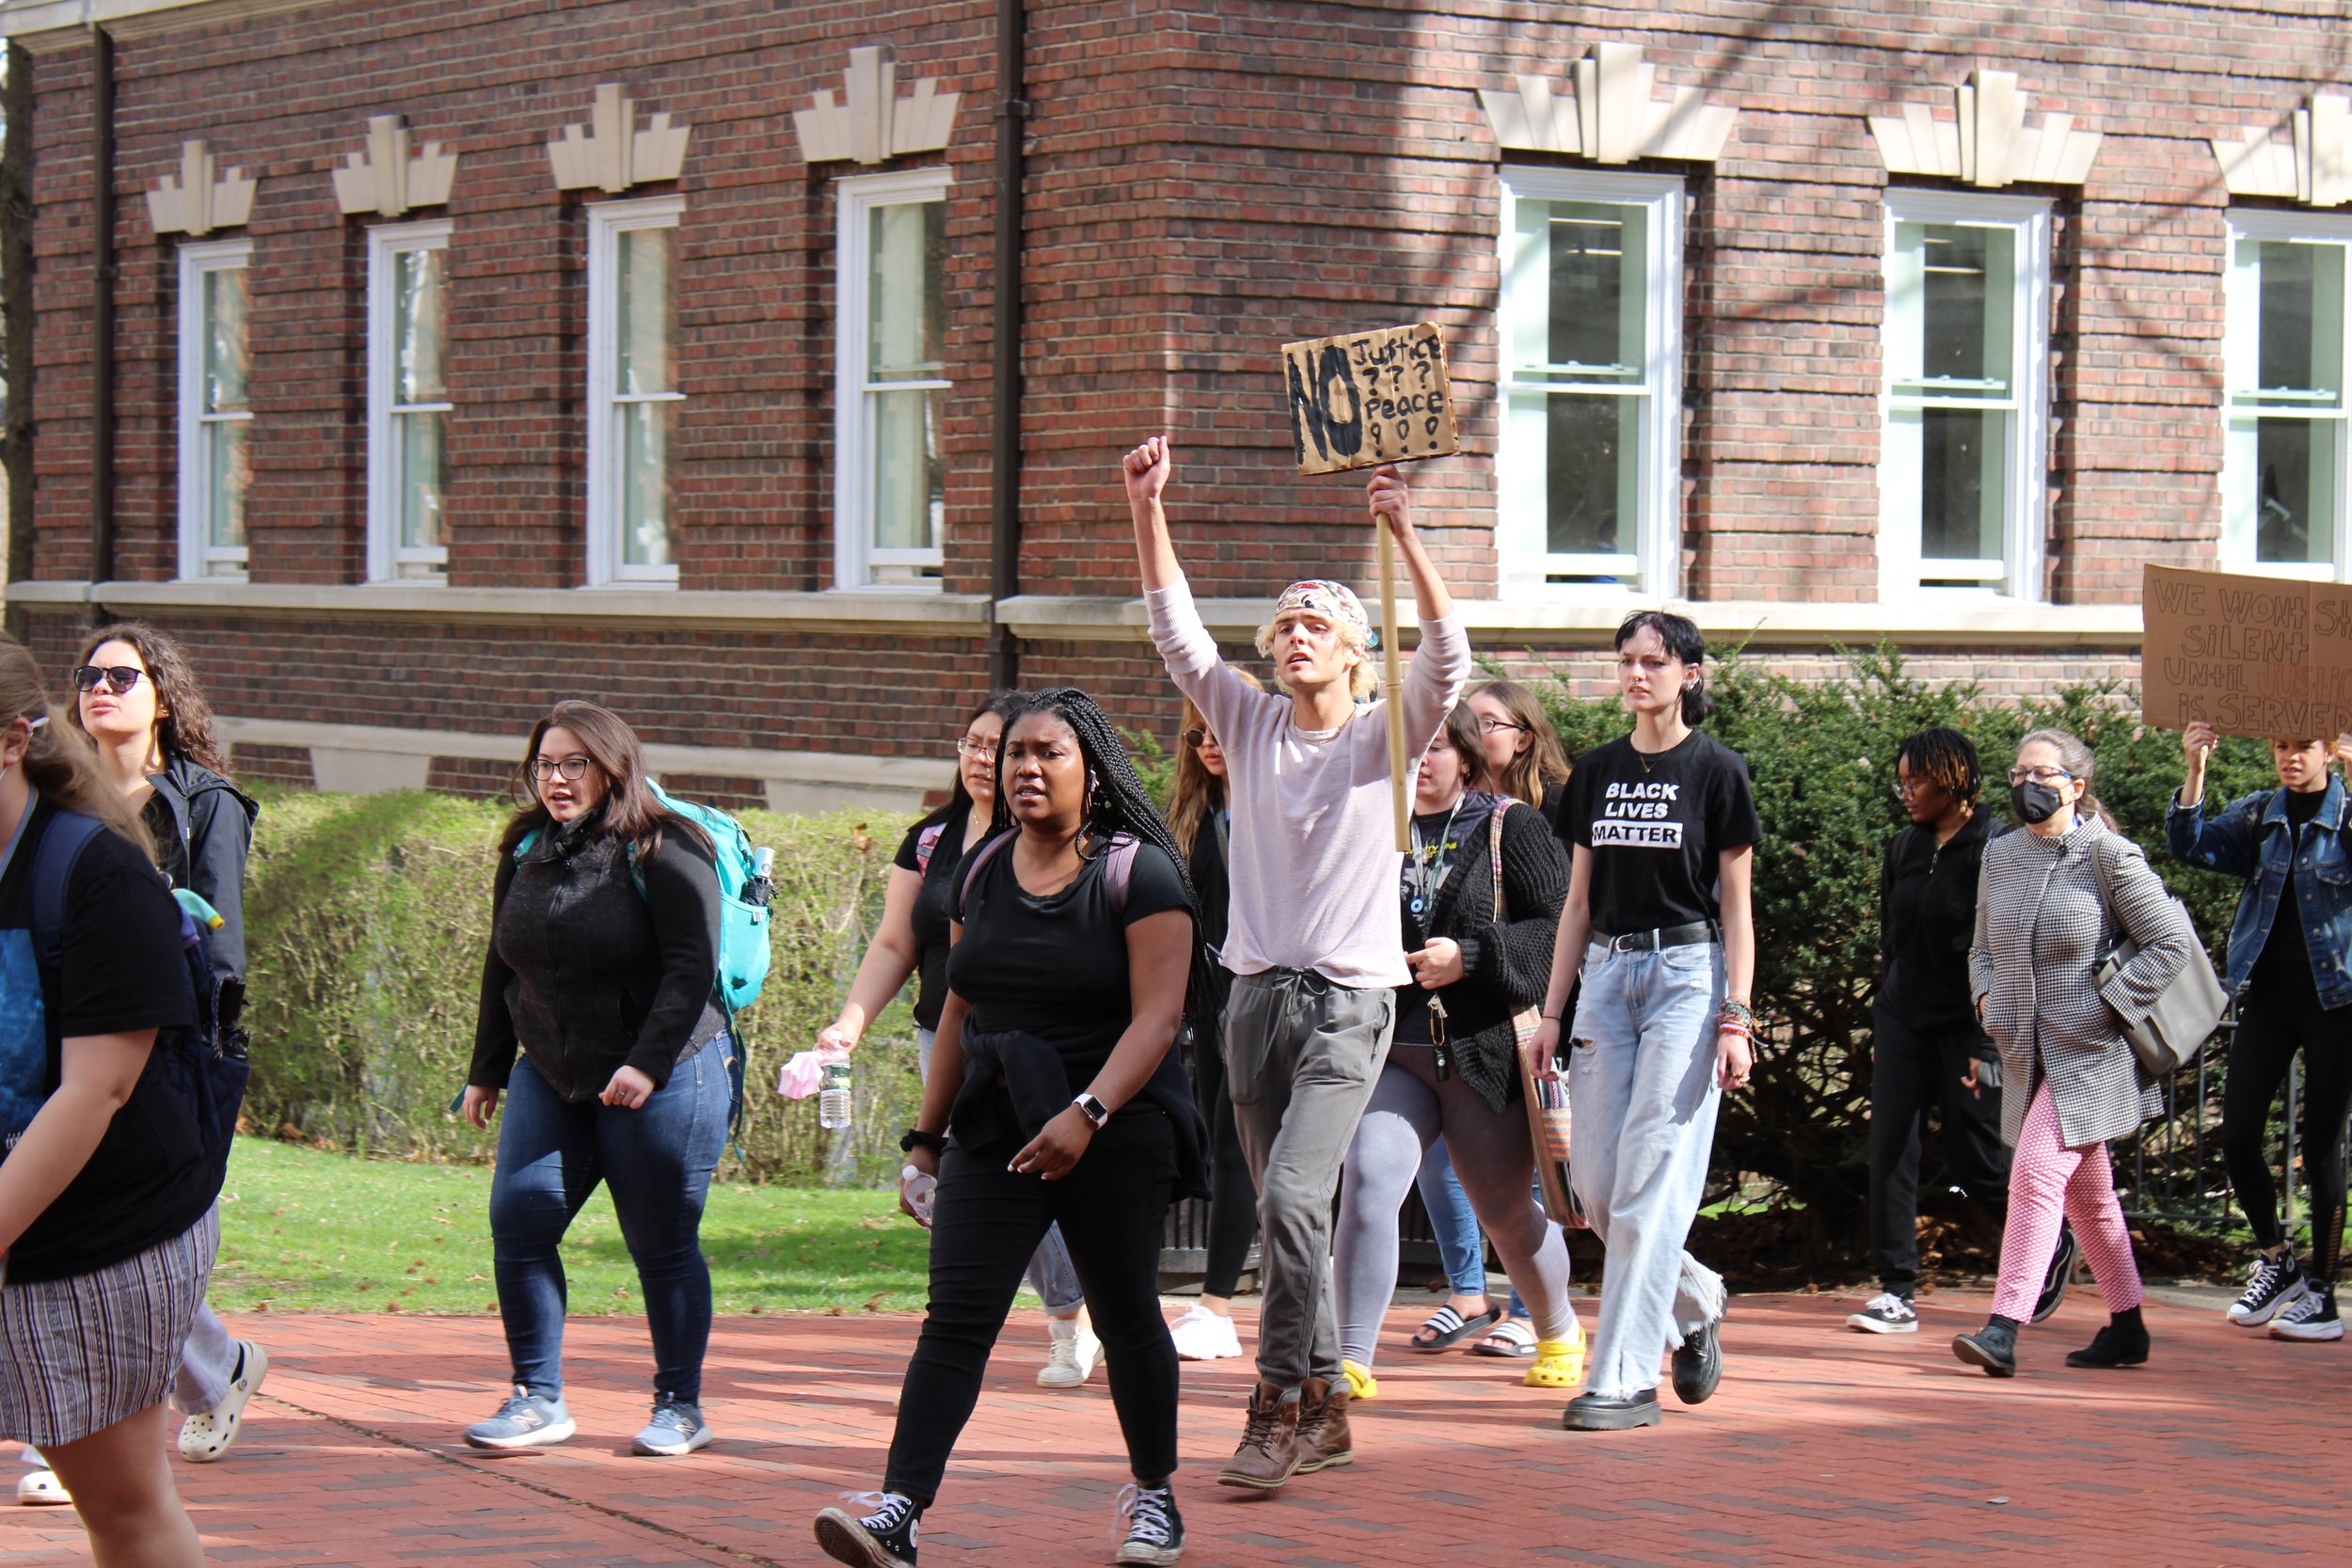  Protesters arrive in front of Cutler Hall. Photo by Izzy Keller. 